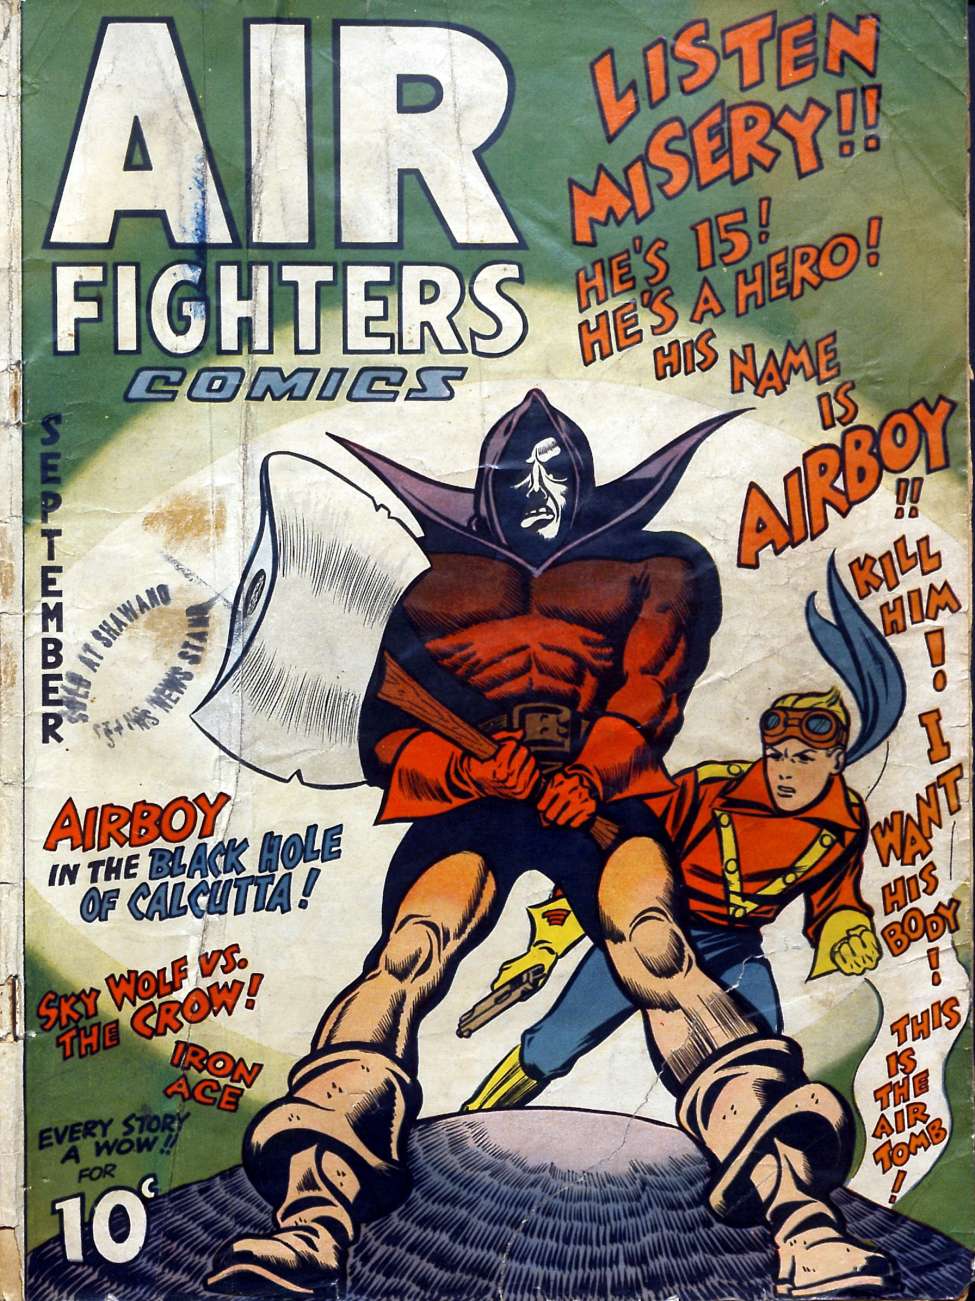 Comic Book Cover For Air Fighters Comics v1 12 (alt) - Version 2